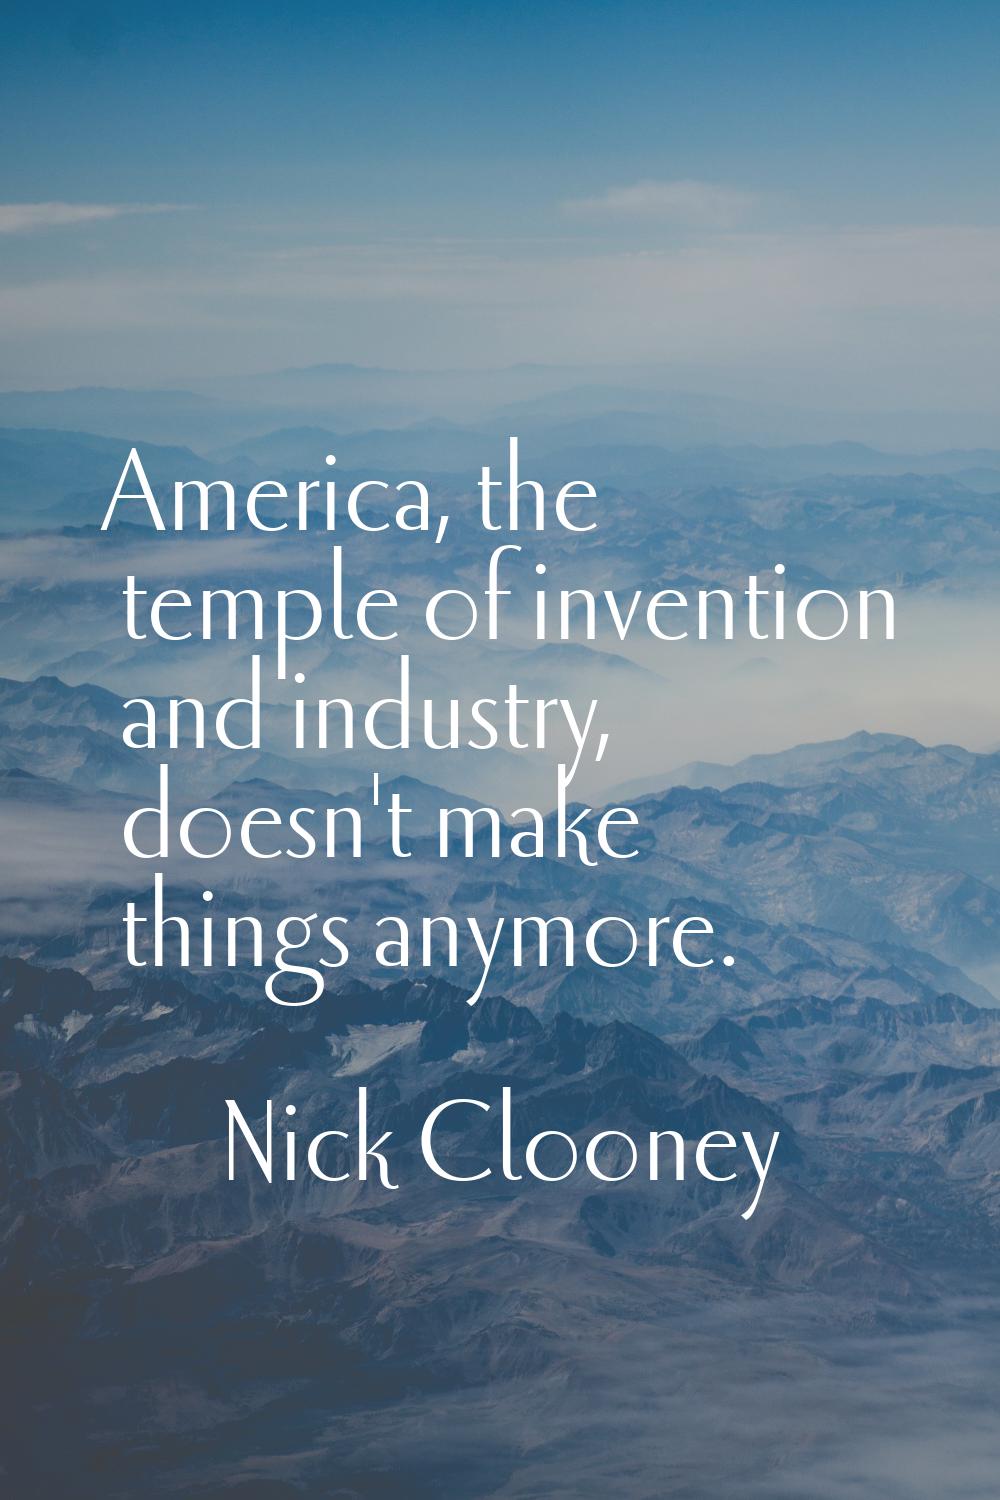 America, the temple of invention and industry, doesn't make things anymore.